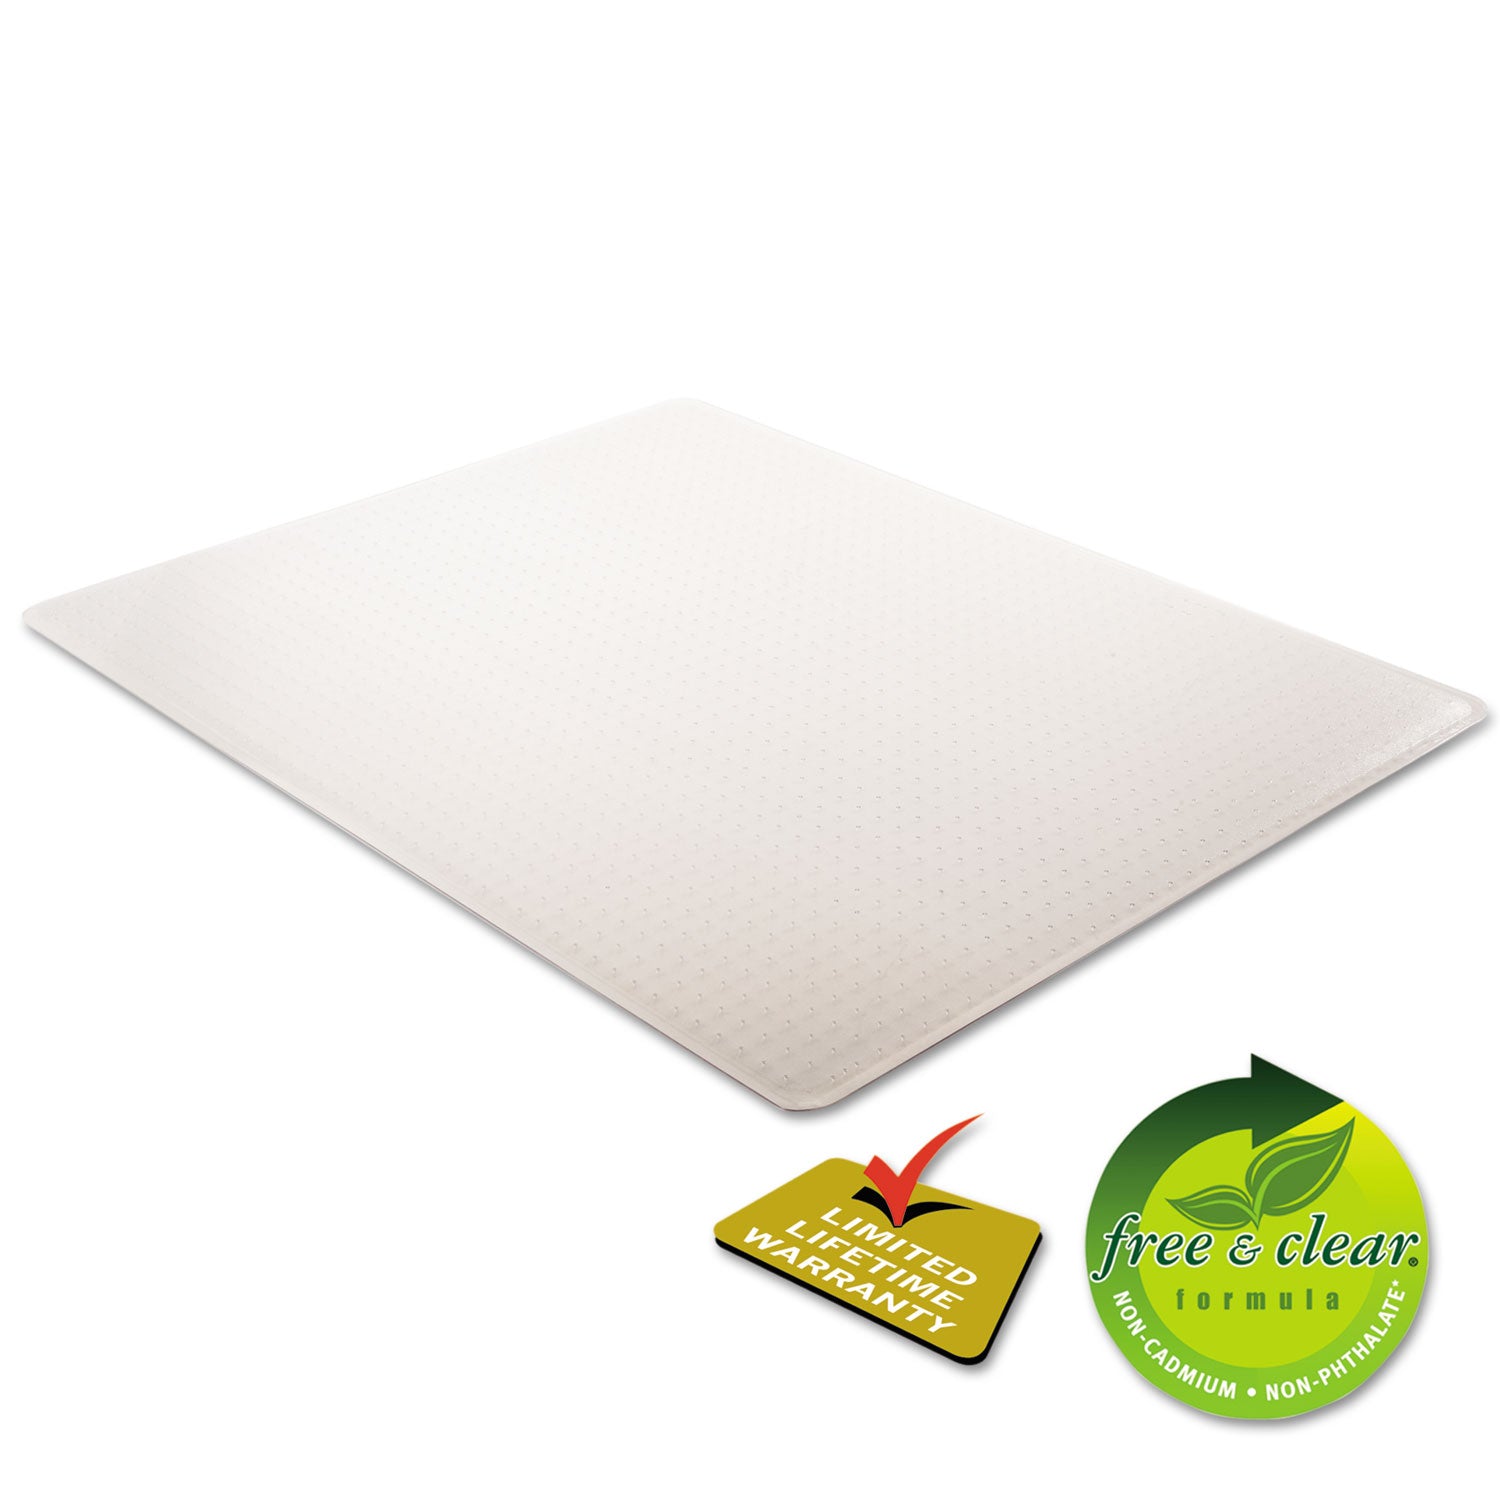 SuperMat Frequent Use Chair Mat, Medium Pile Carpet, Flat, 46 x 60, Rectangle, Clear - 